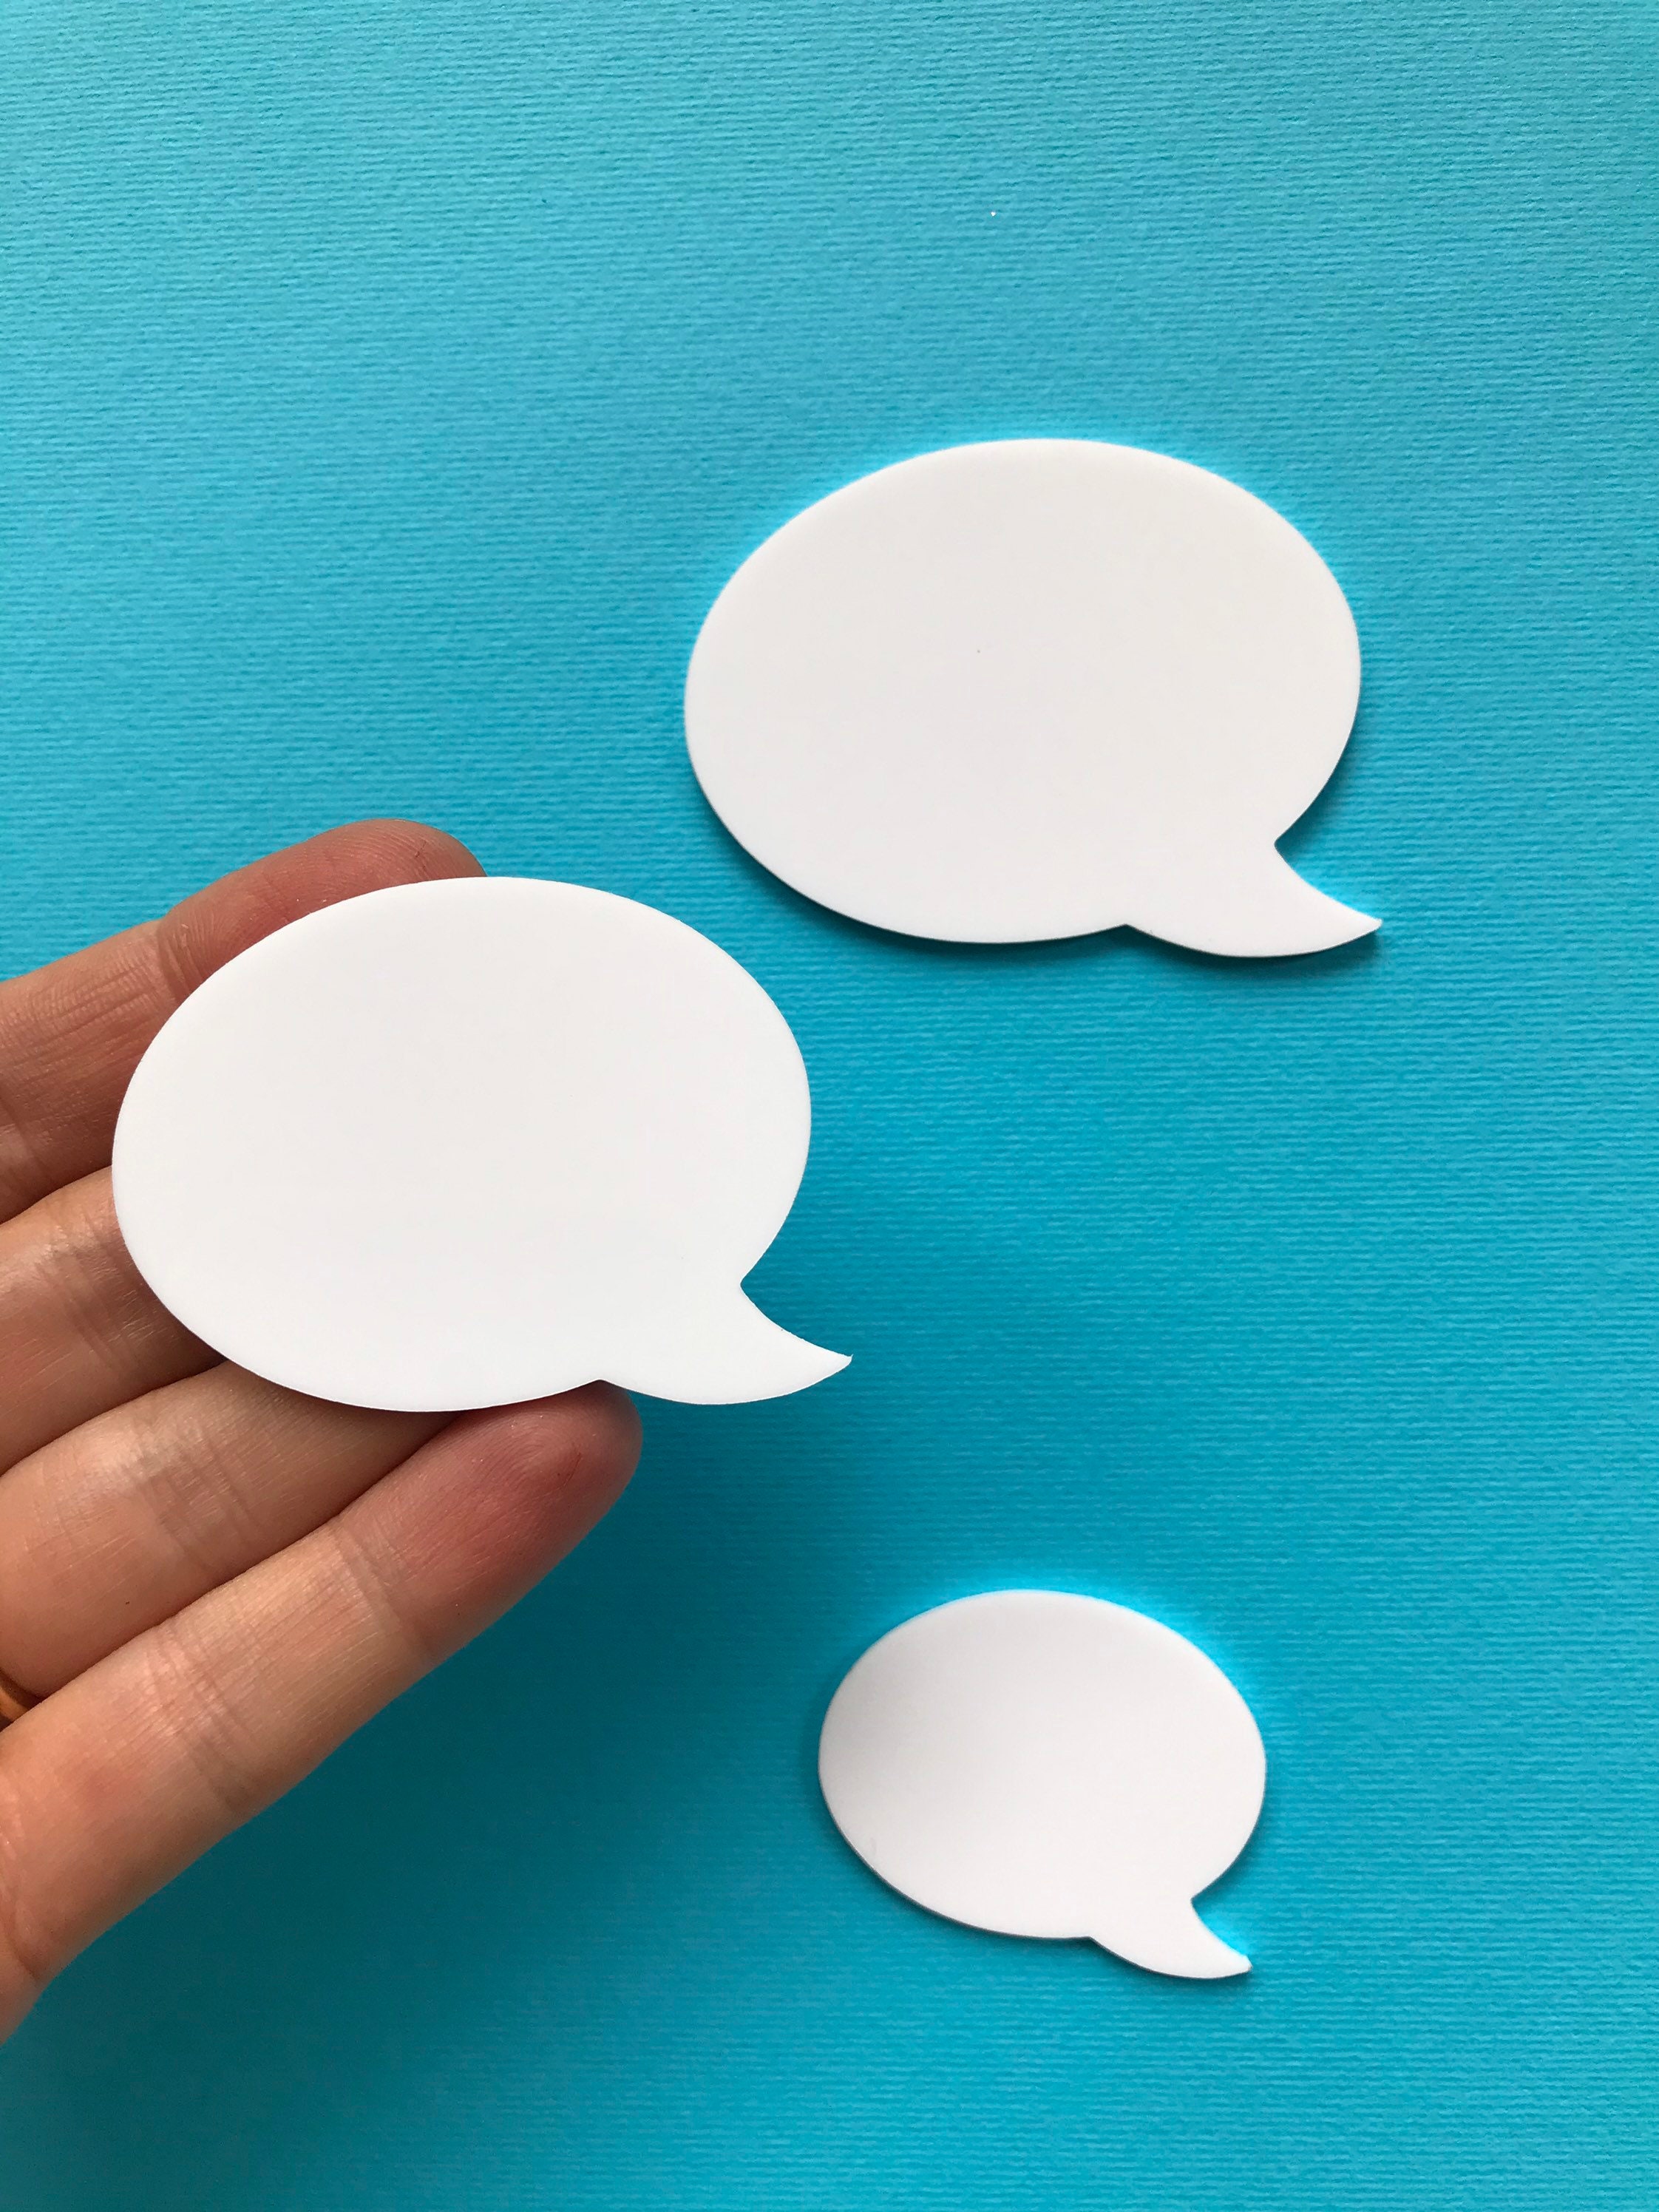 make your own speech bubble